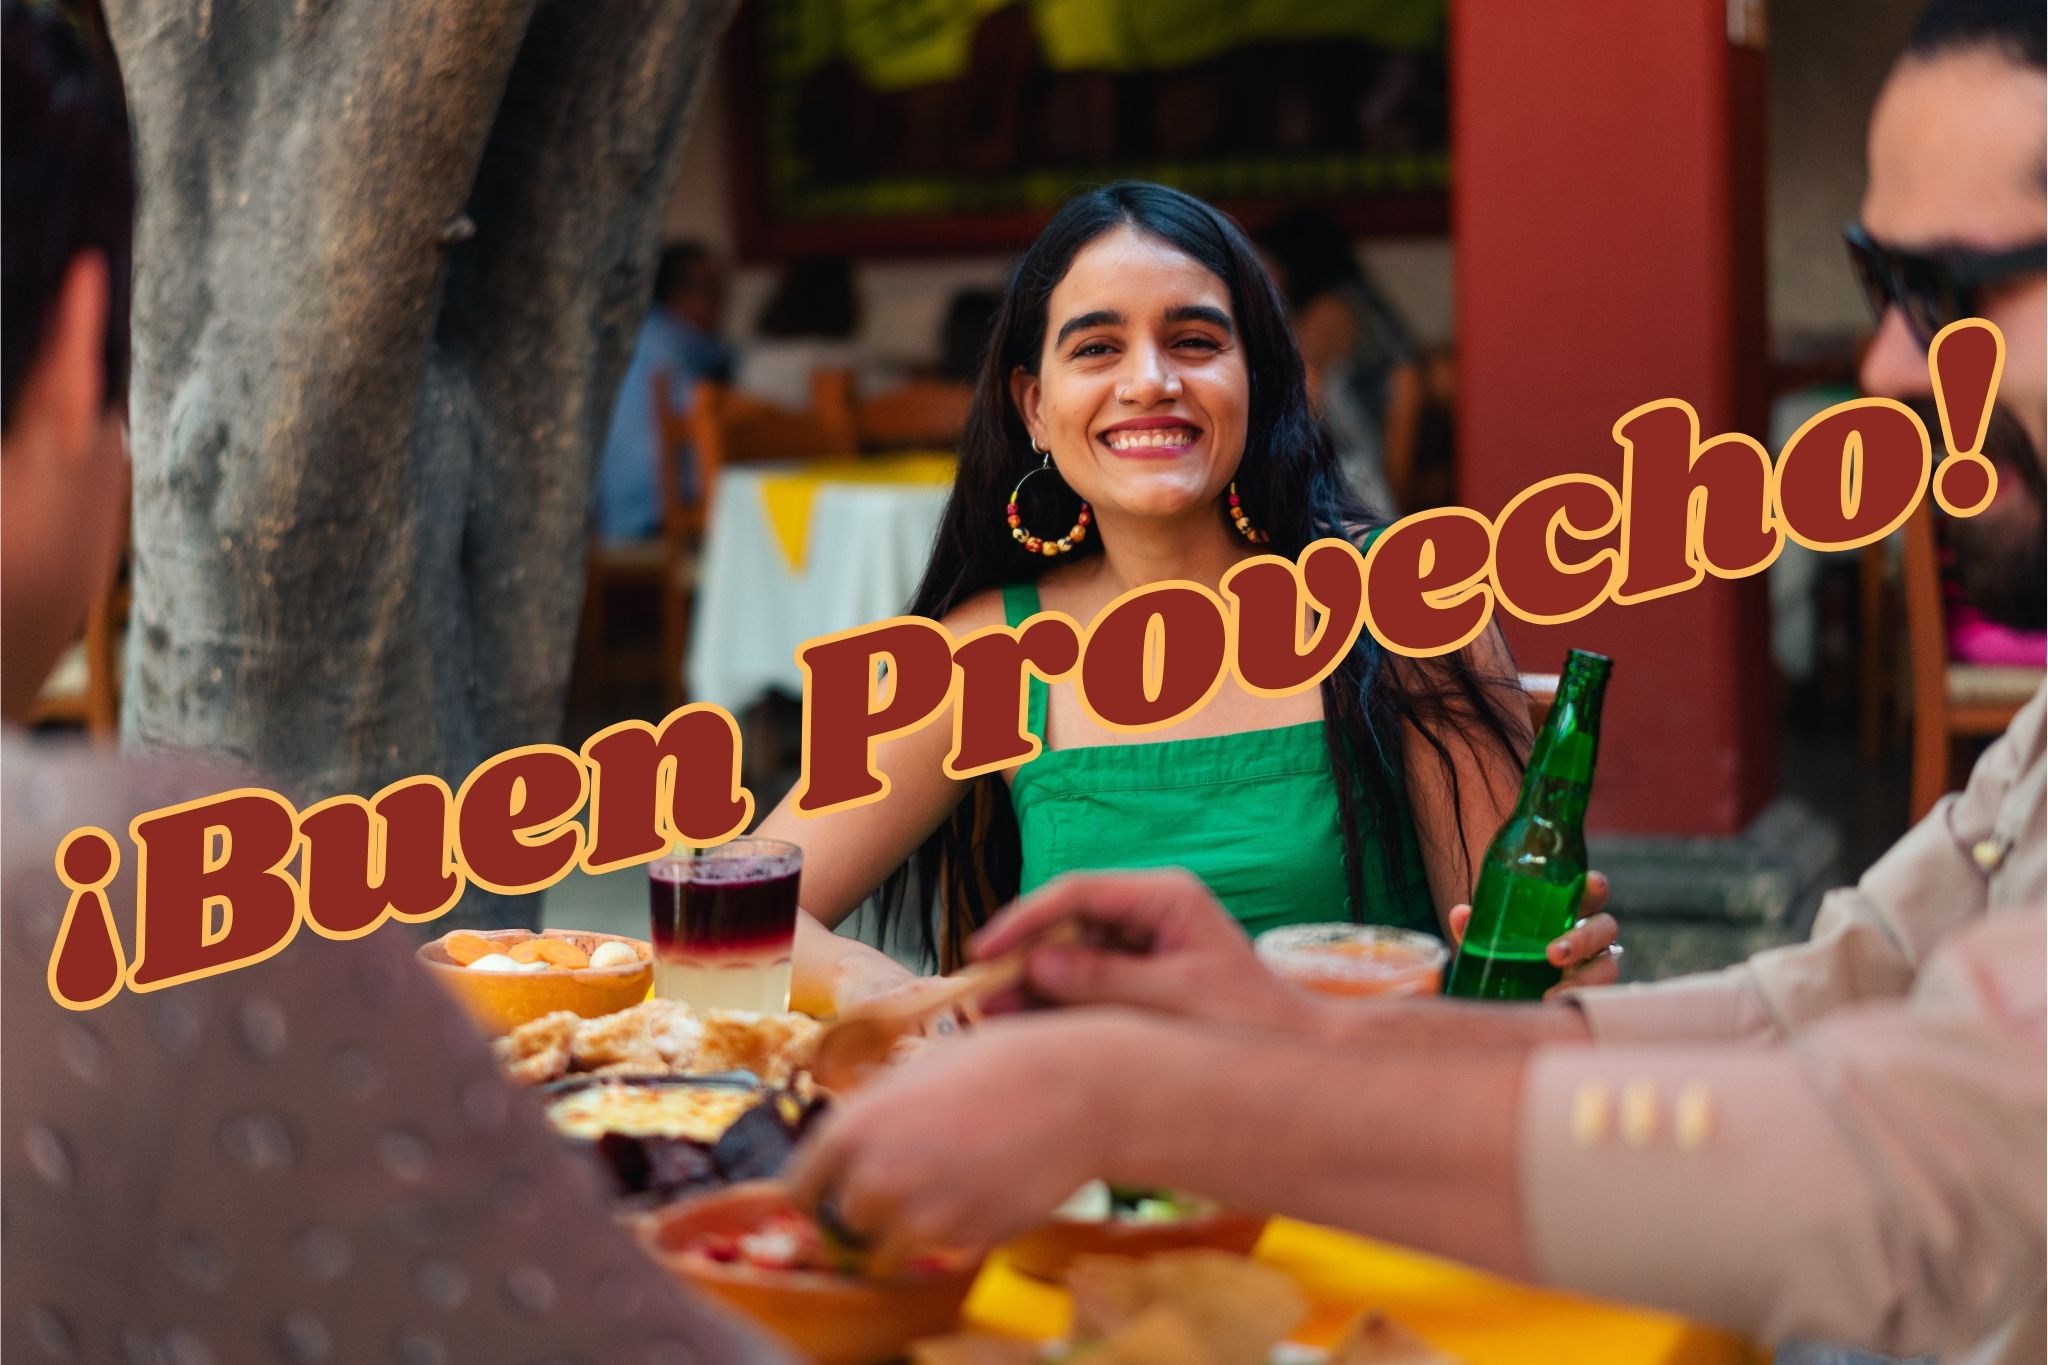 Friends at a restaurant with the title: ¡Buen Provecho!